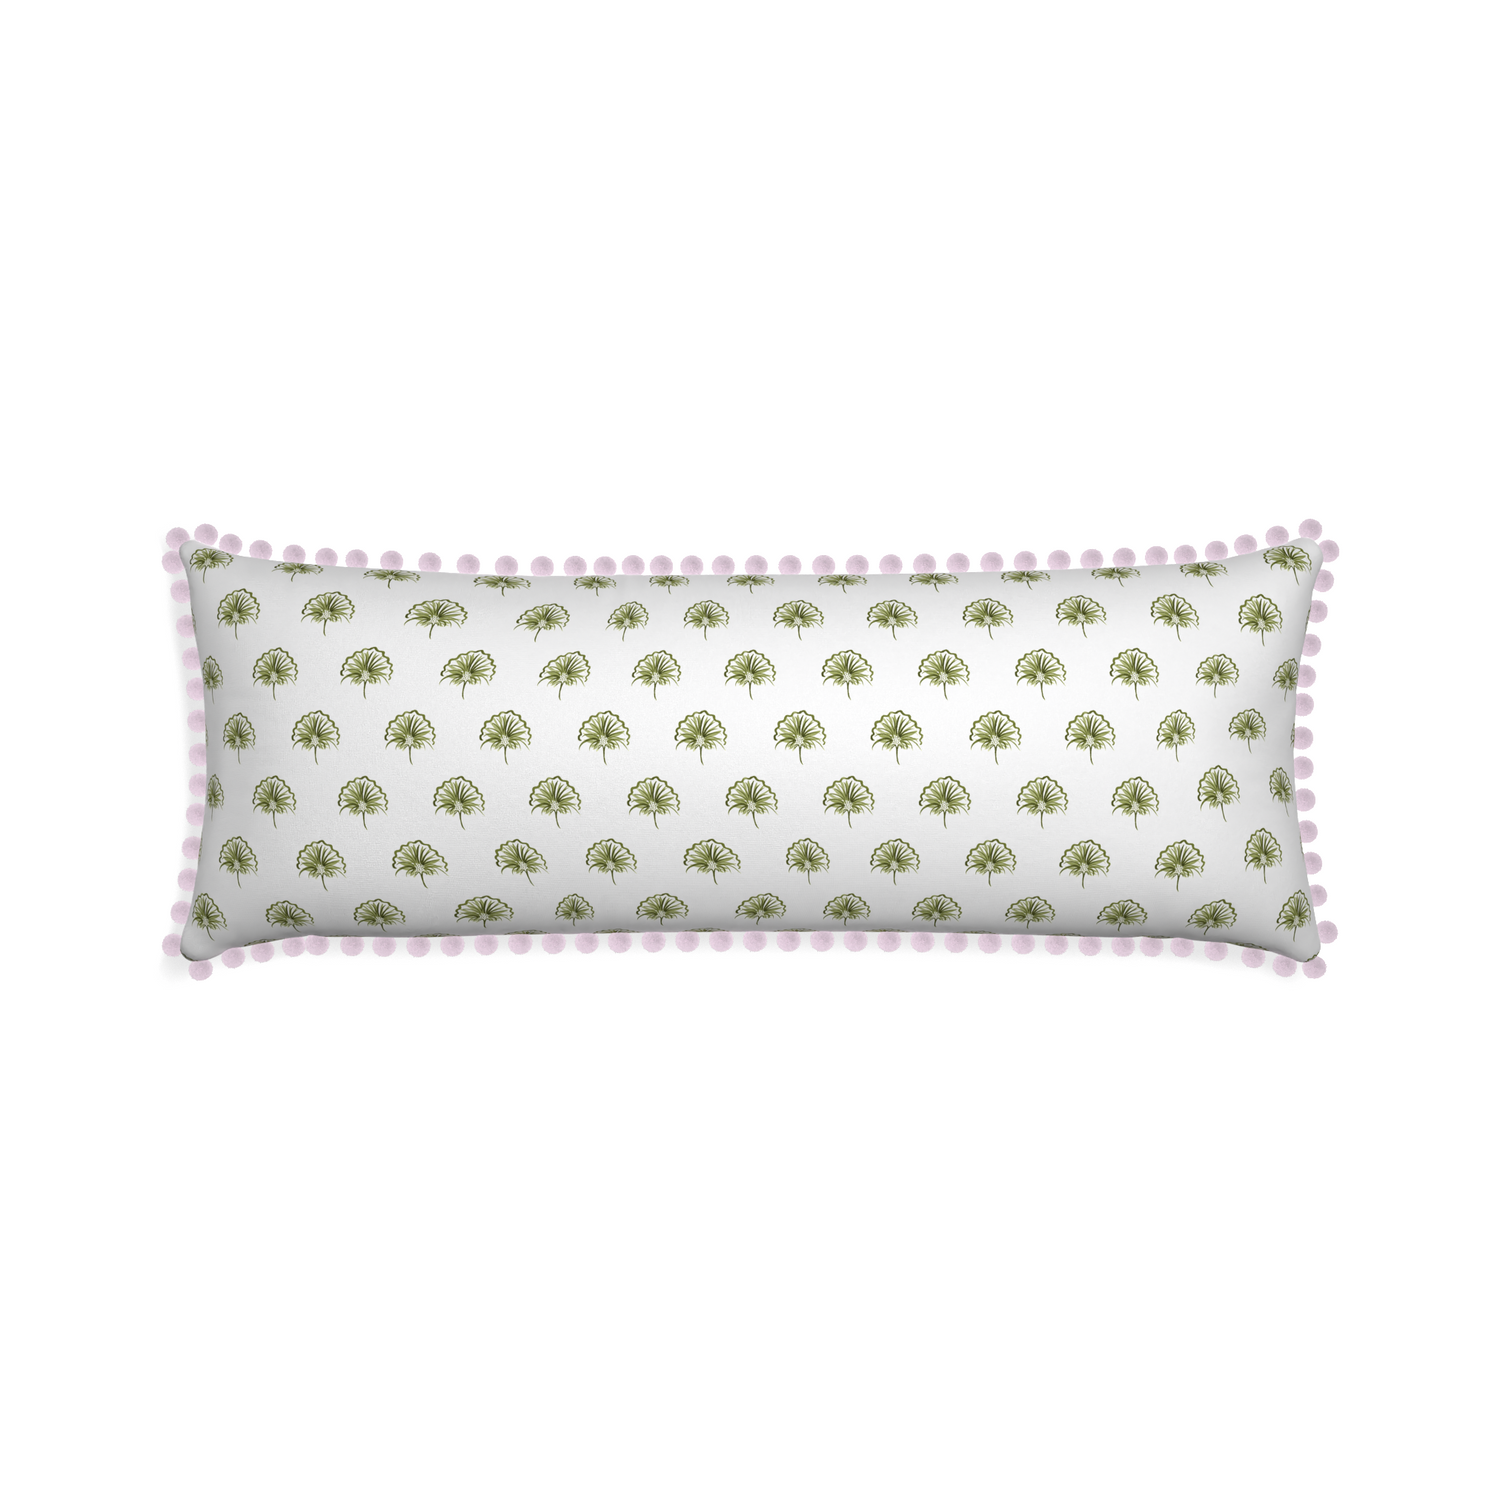 Xl-lumbar penelope moss custom pillow with l on white background